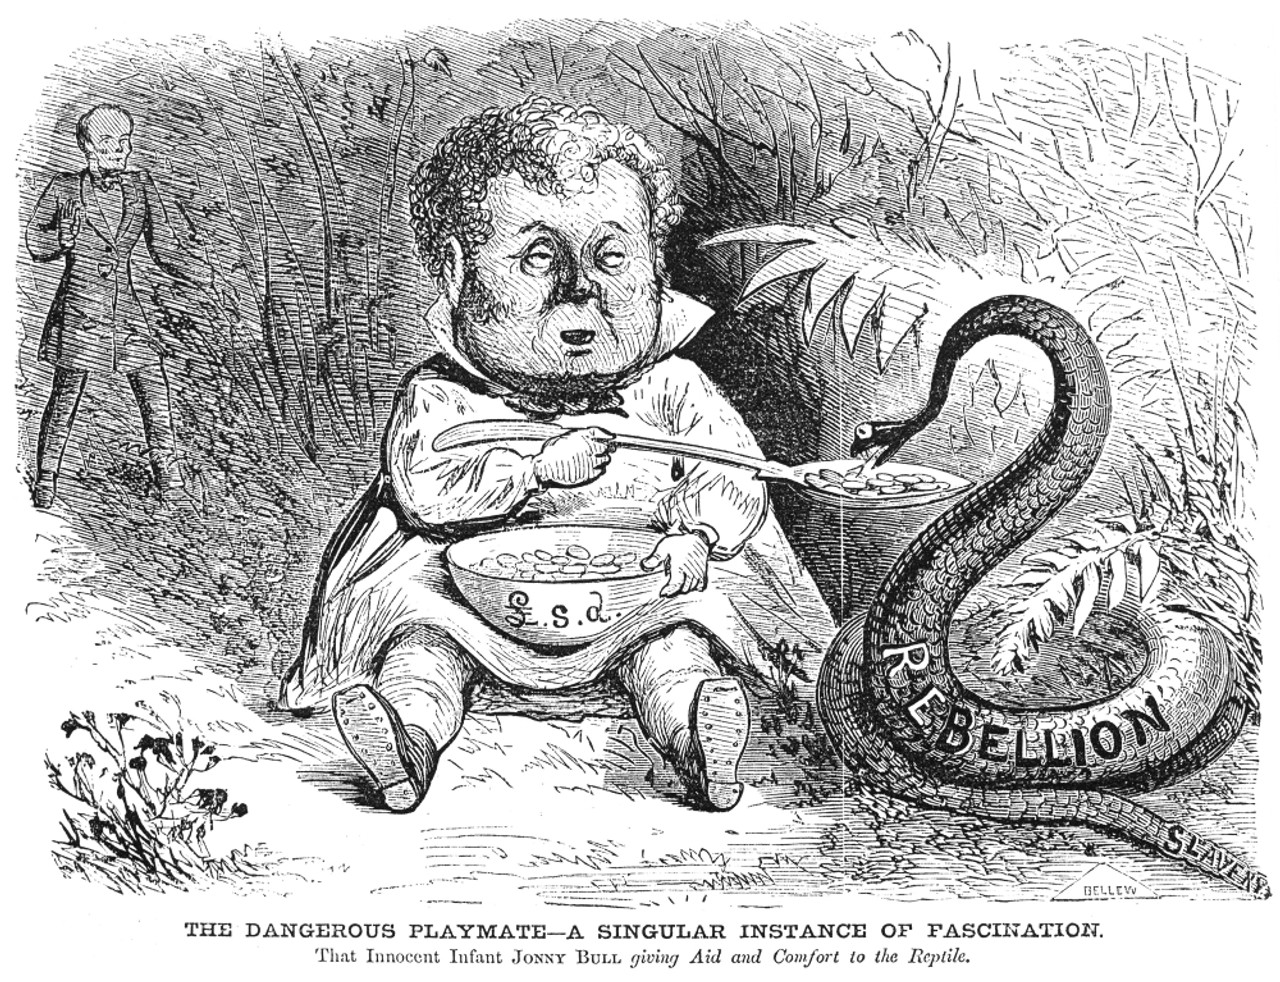 Civil War Cartoon, 1861. /Nengland, Embodied By Infant John Bull, Feeds  Money To The Rebellious American South. Cartoon From A Northern American